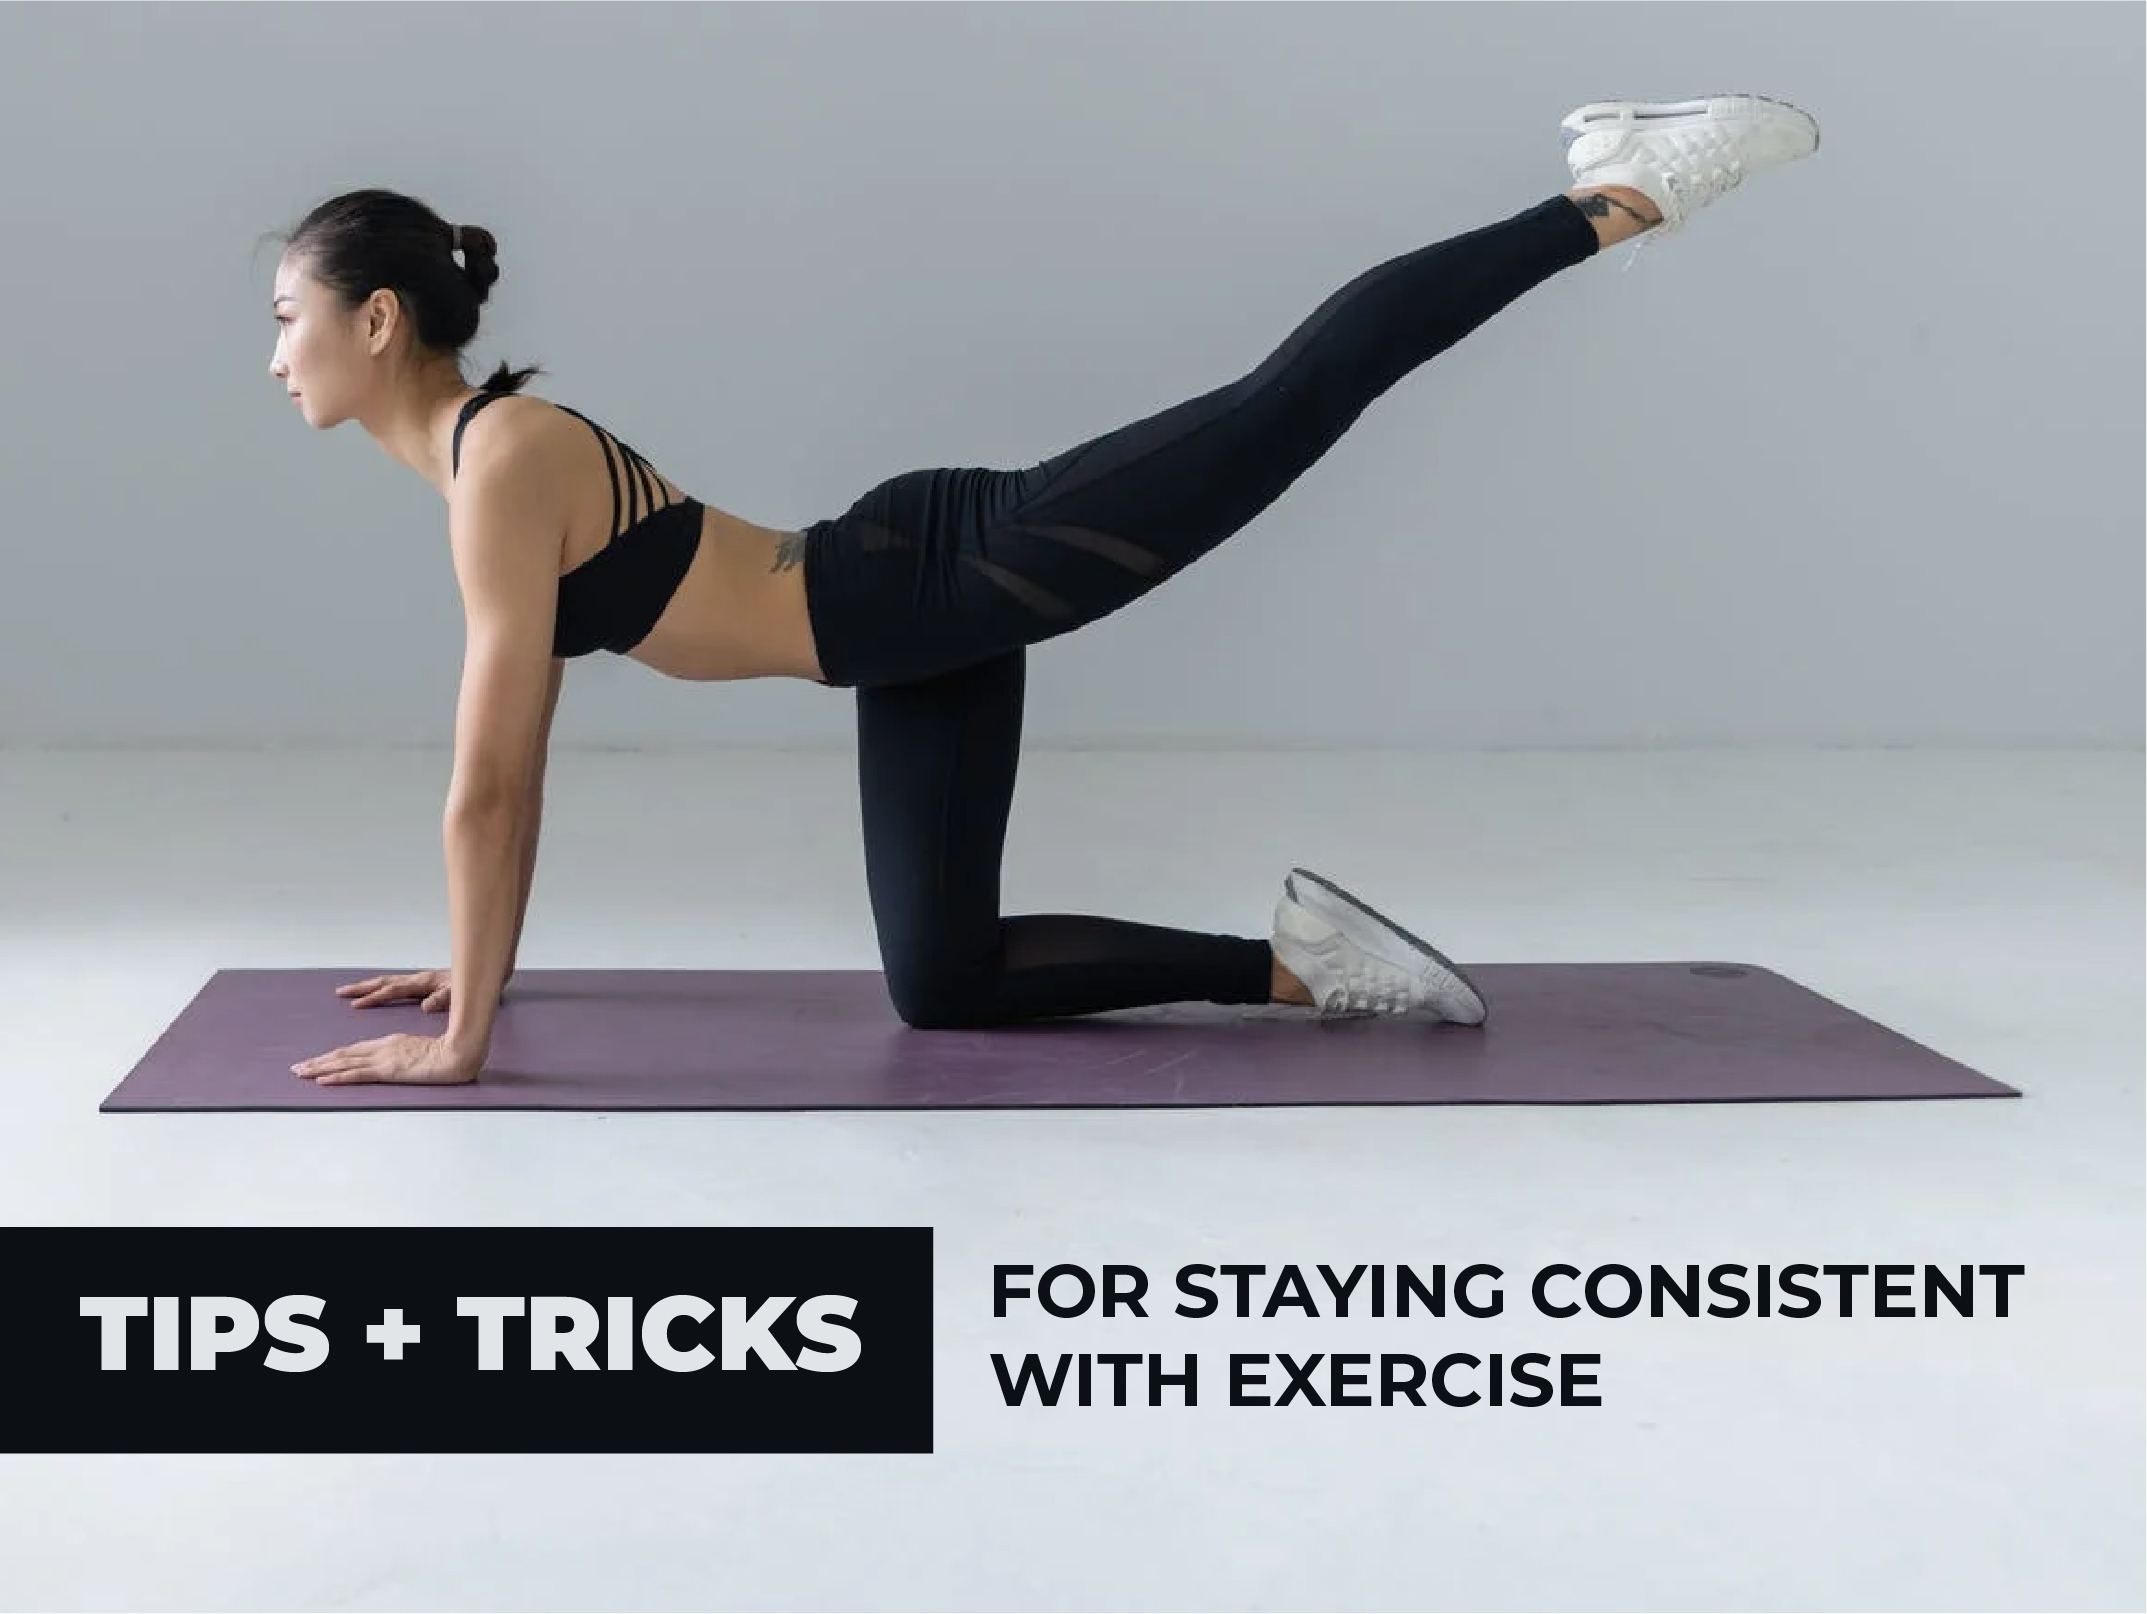 Tips + Tricks for Staying Consistent with Exercise